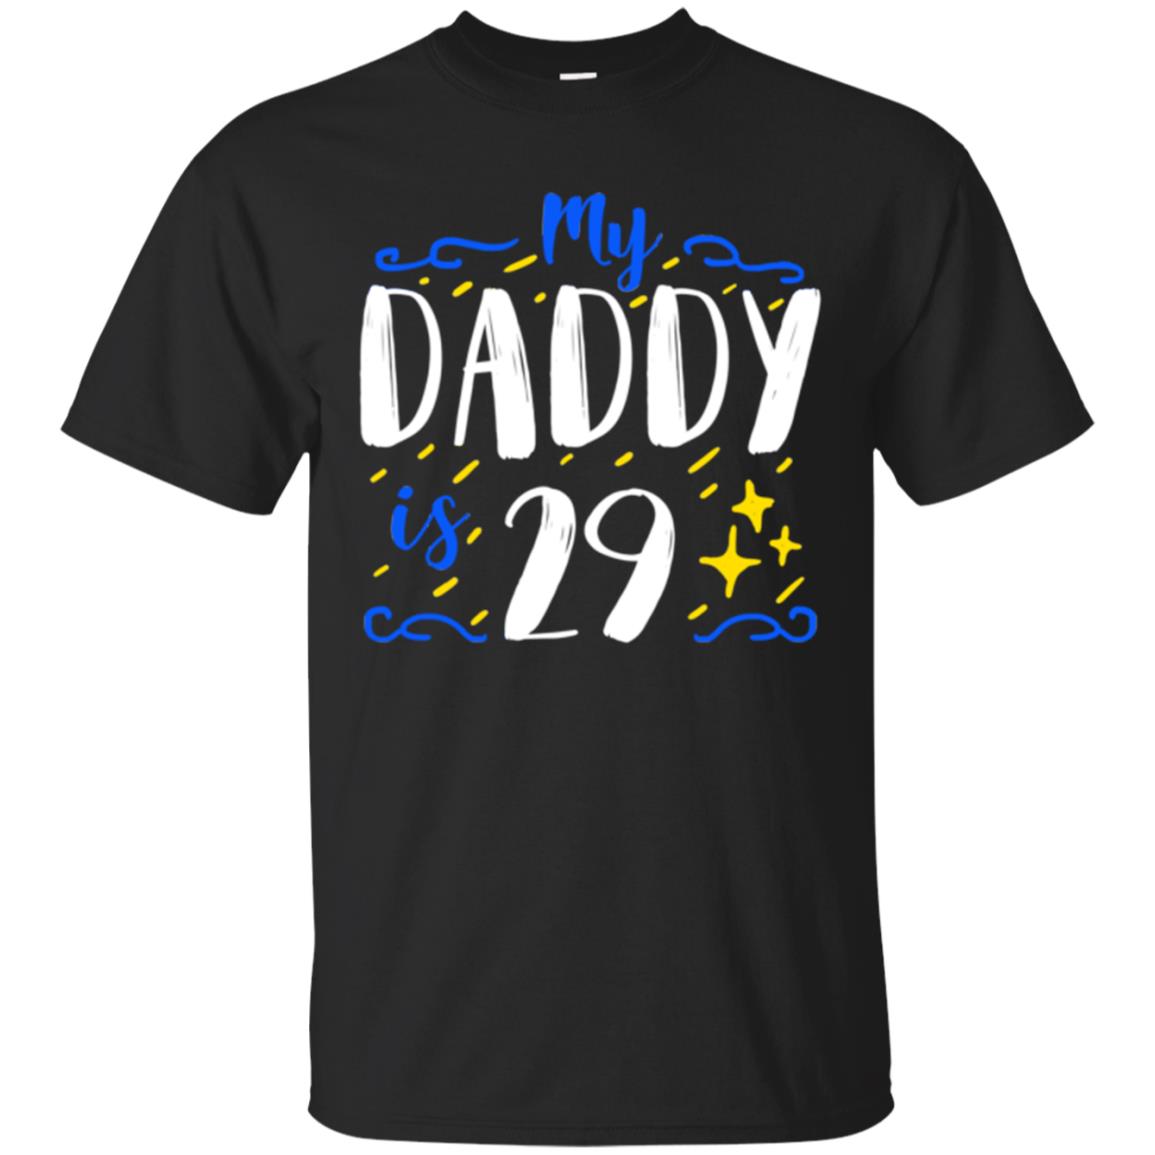 My Daddy Is 29 29th Birthday Daddy Shirt For Sons Or DaughtersG200 Gildan Ultra Cotton T-Shirt